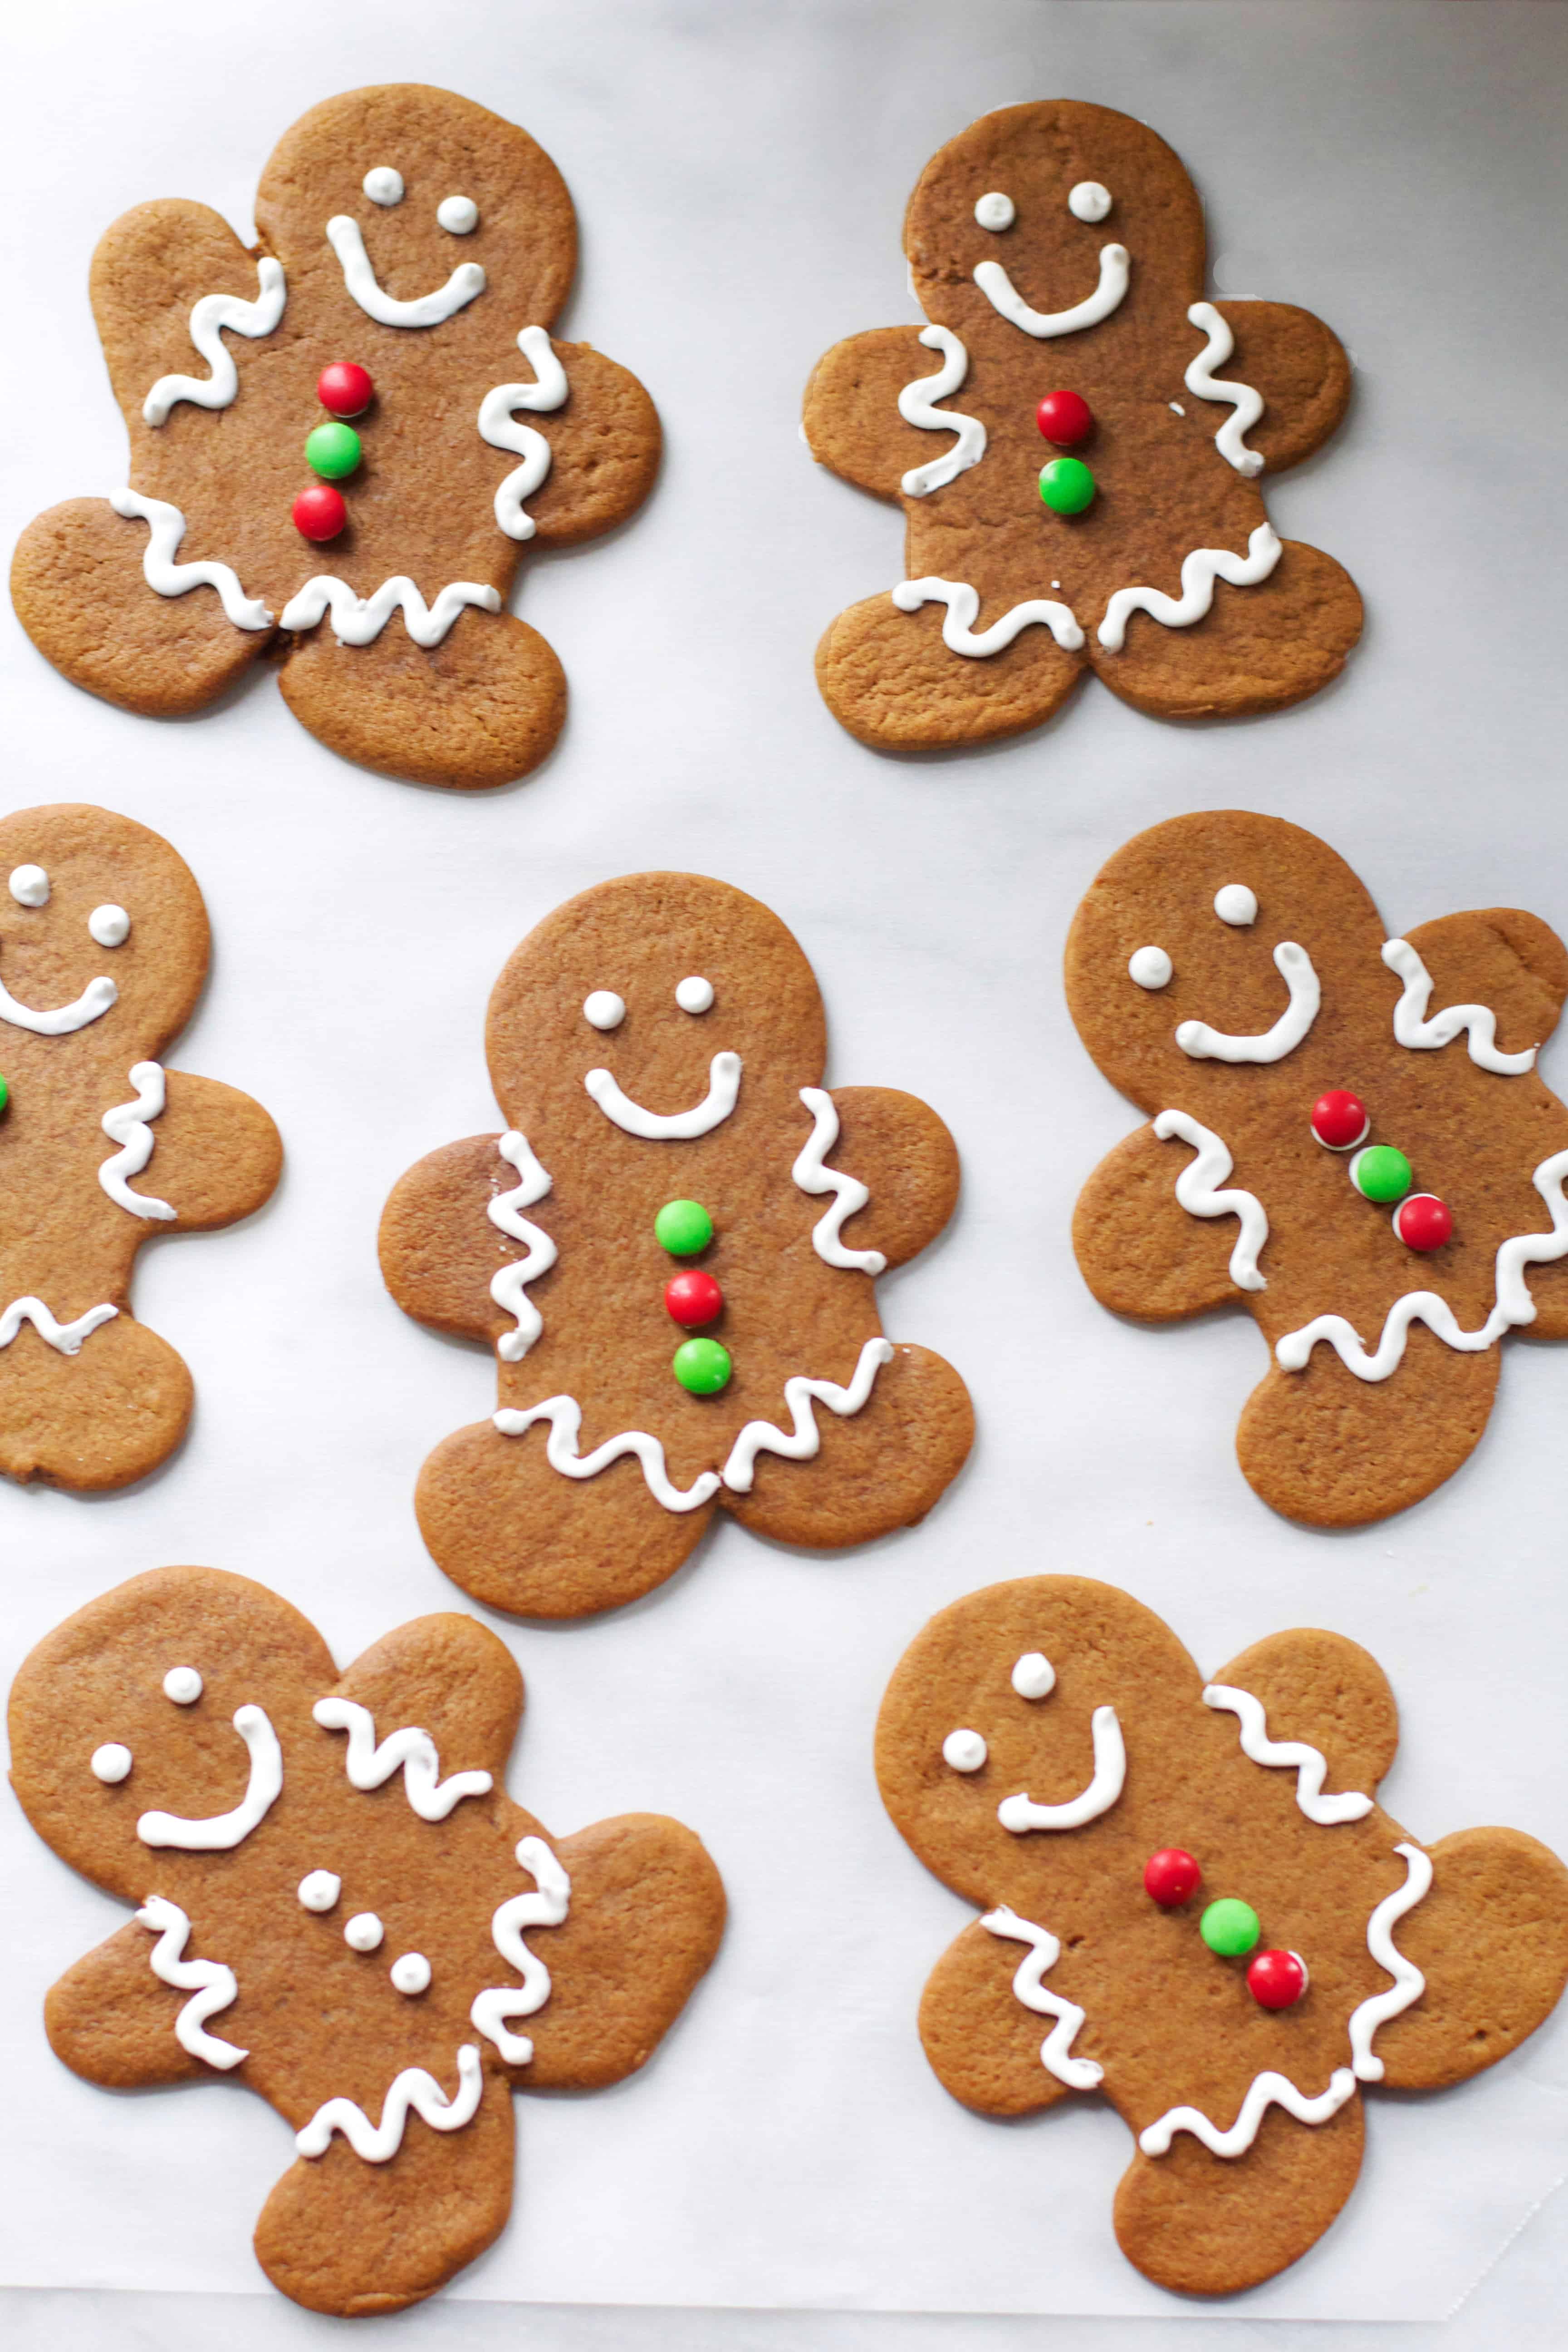 Soft and Chewy Gingerbread Men - The Baker Chick